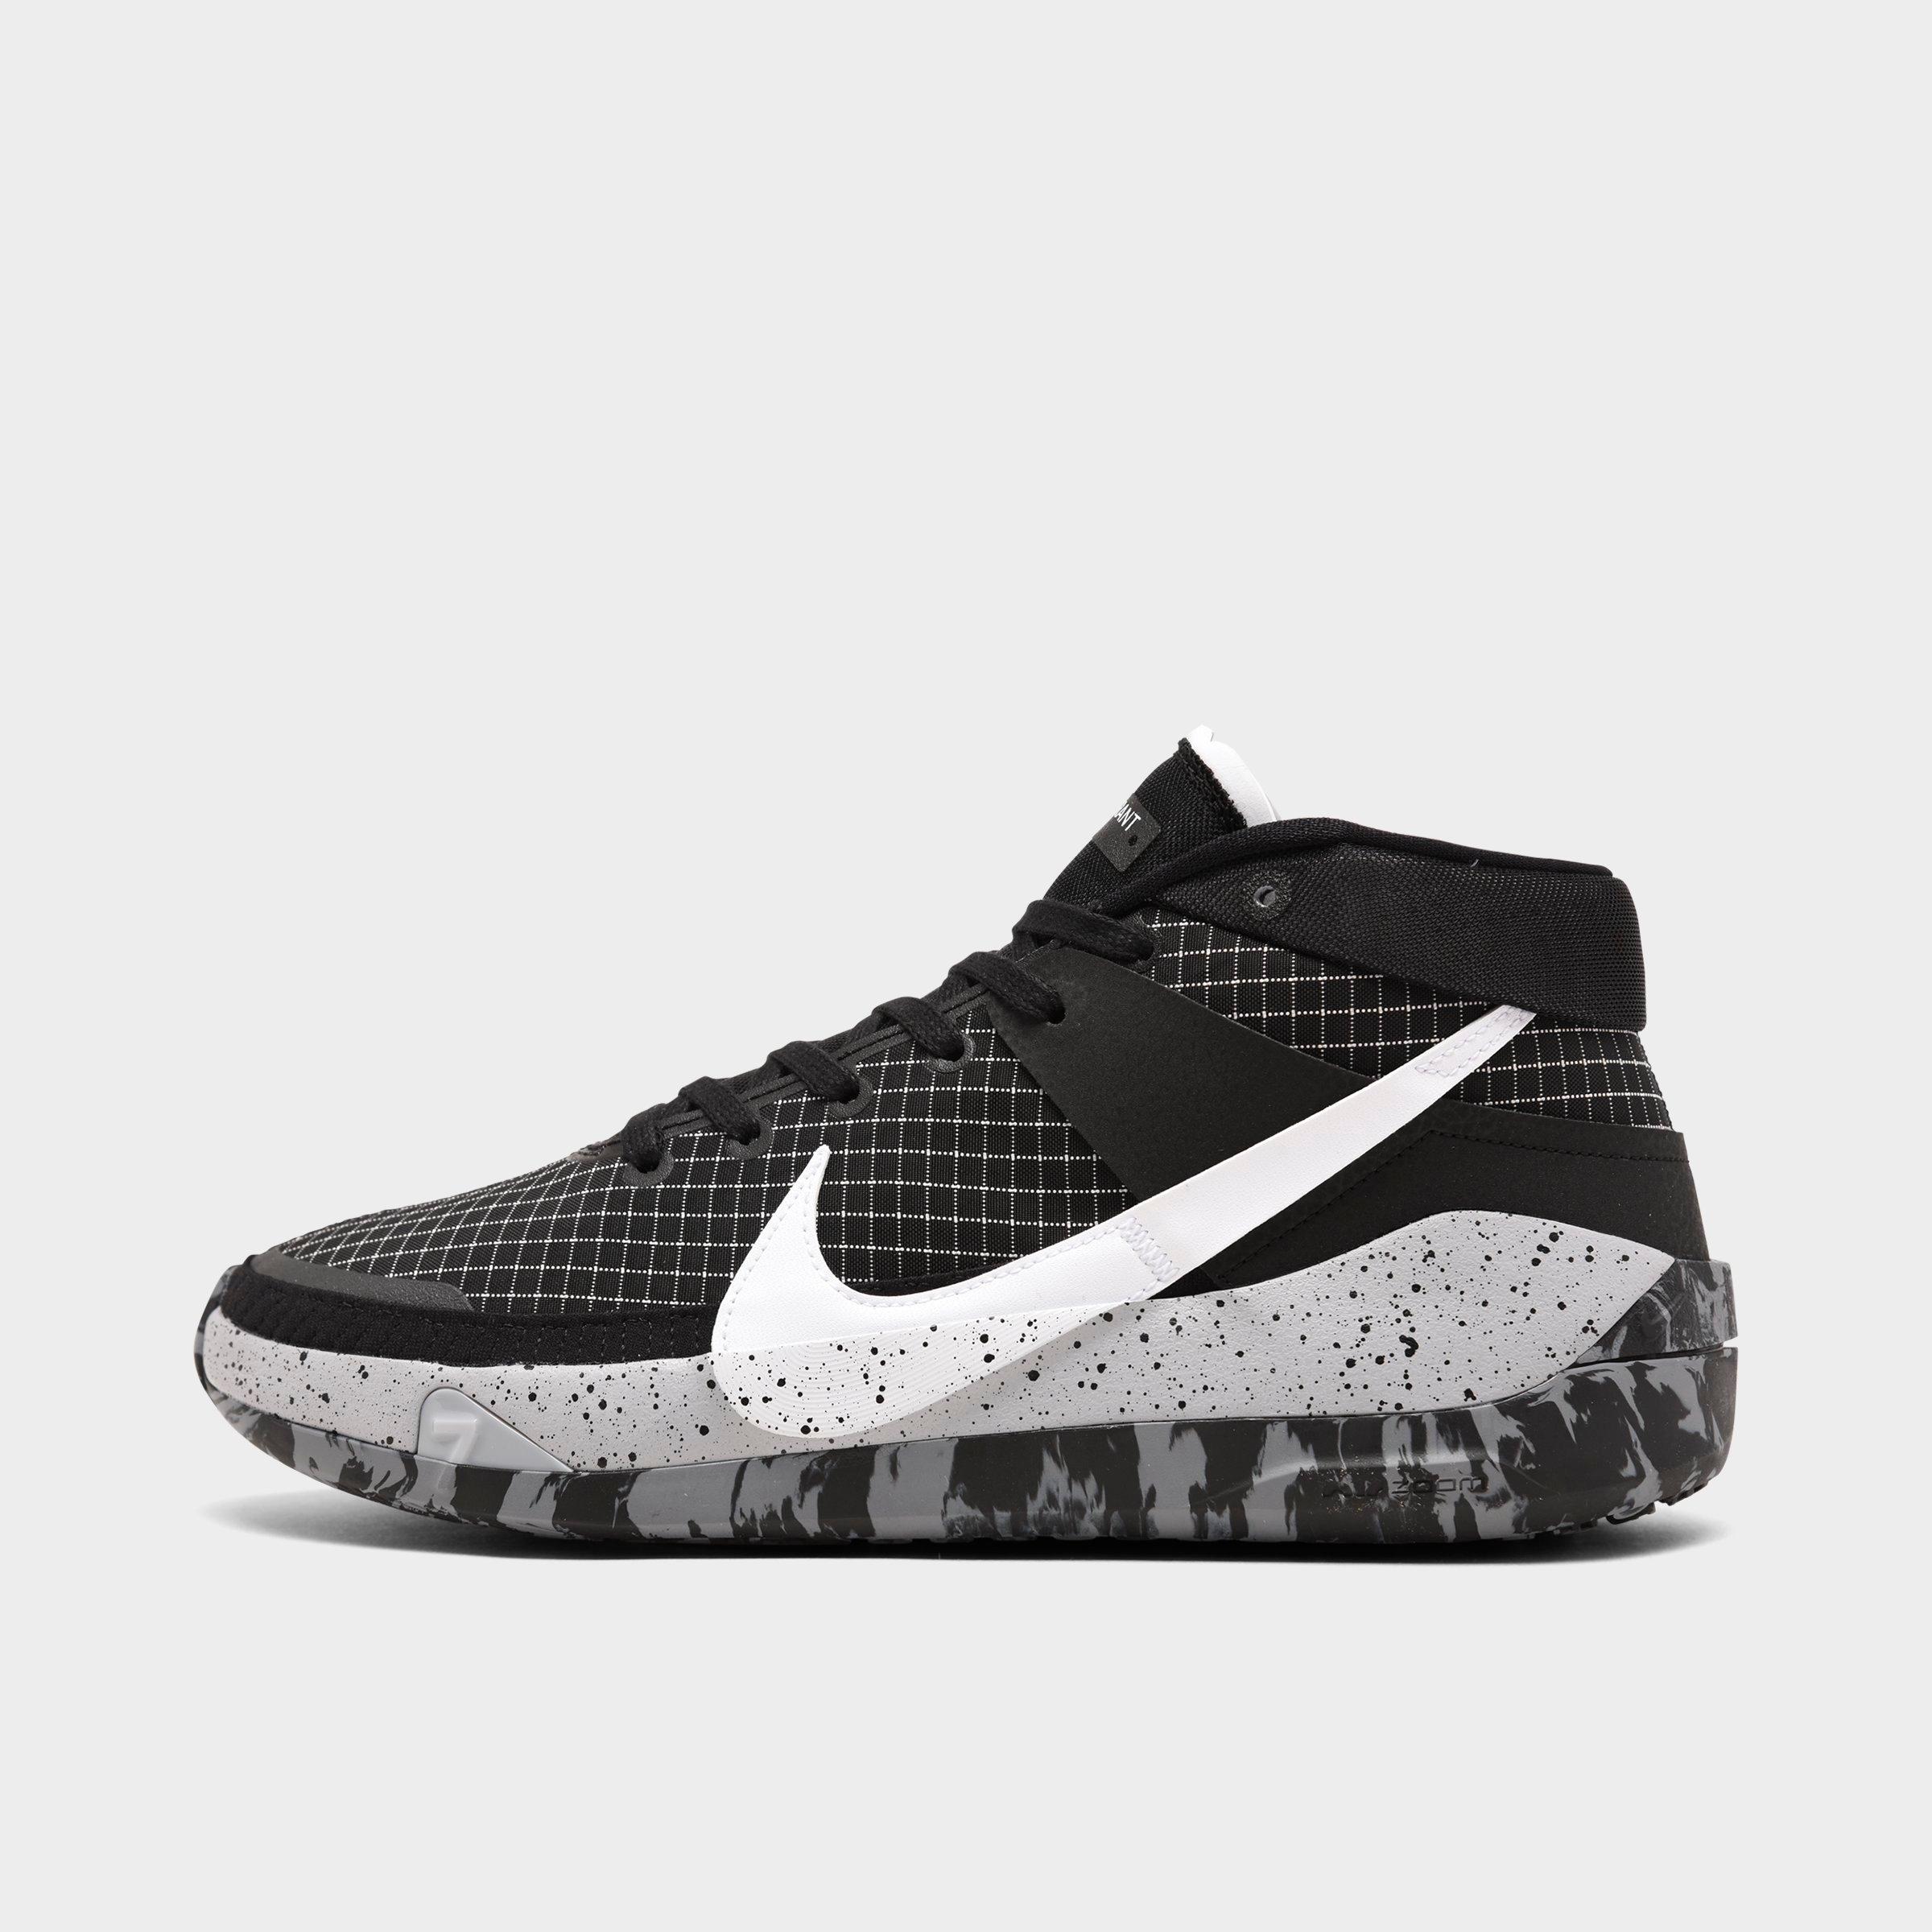 finish line mens basketball shoes